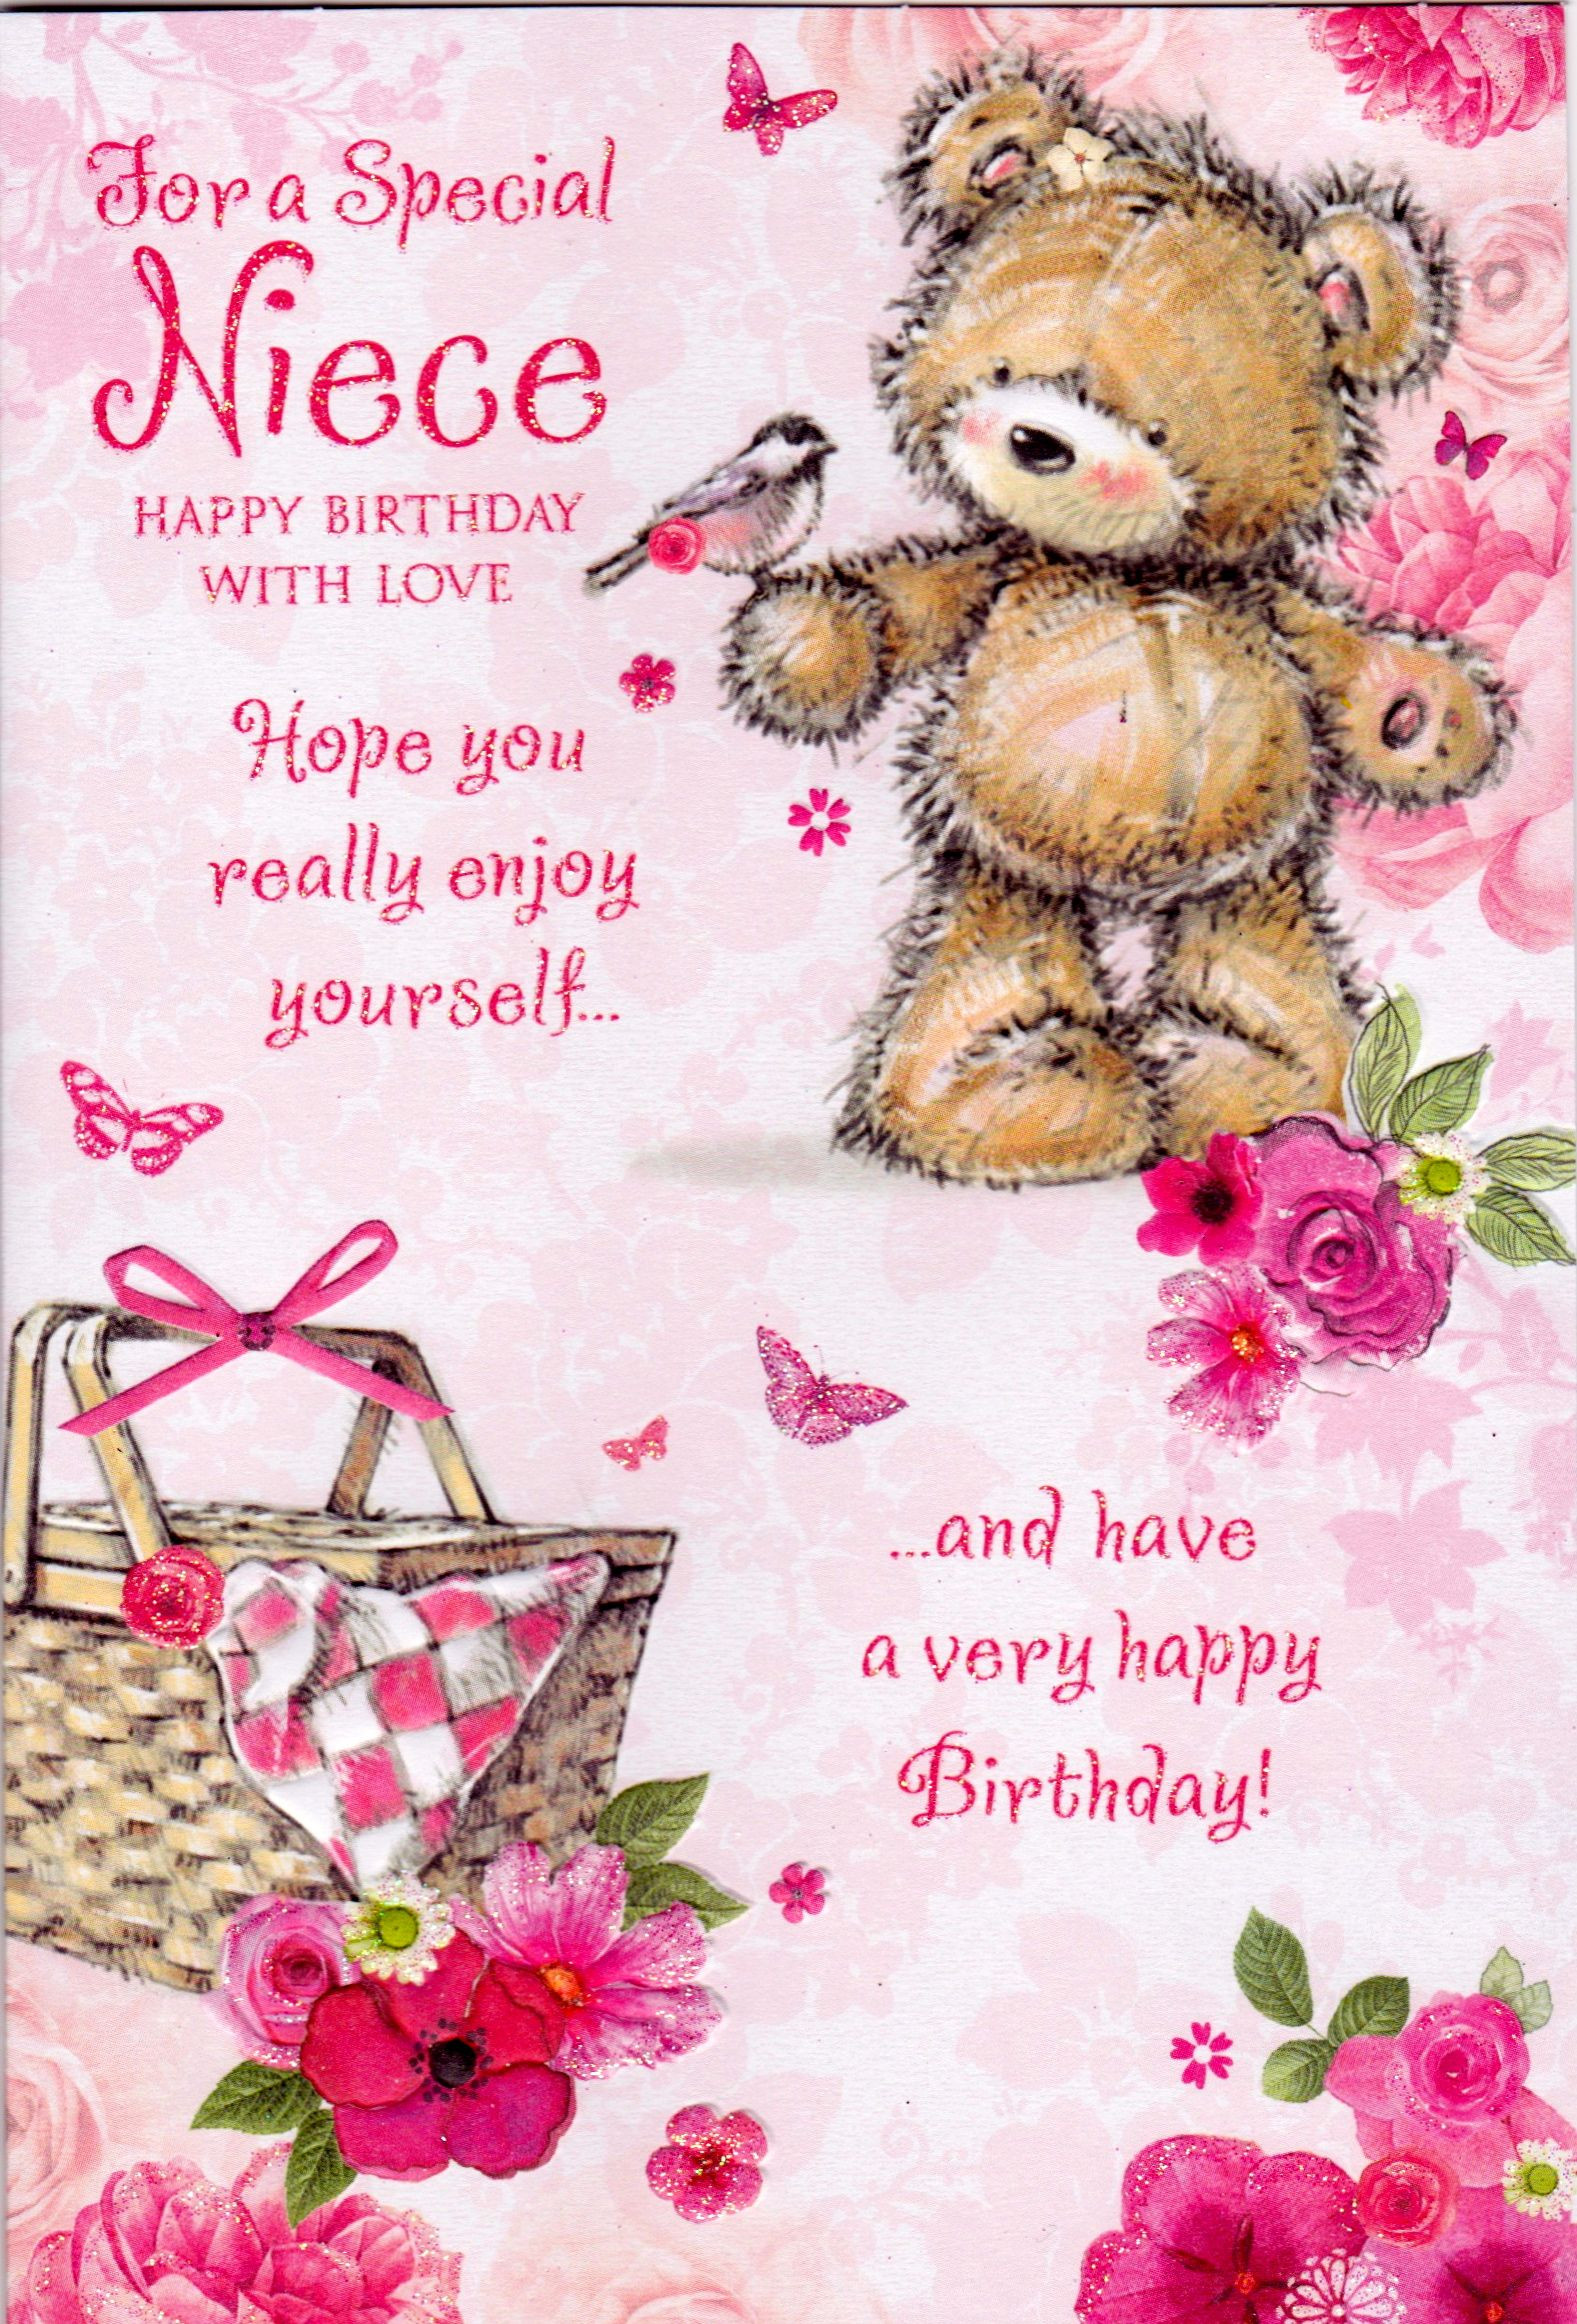 Birthday Wishes For A Special Niece
 birthday invitations card happy birthday greetings to 1st